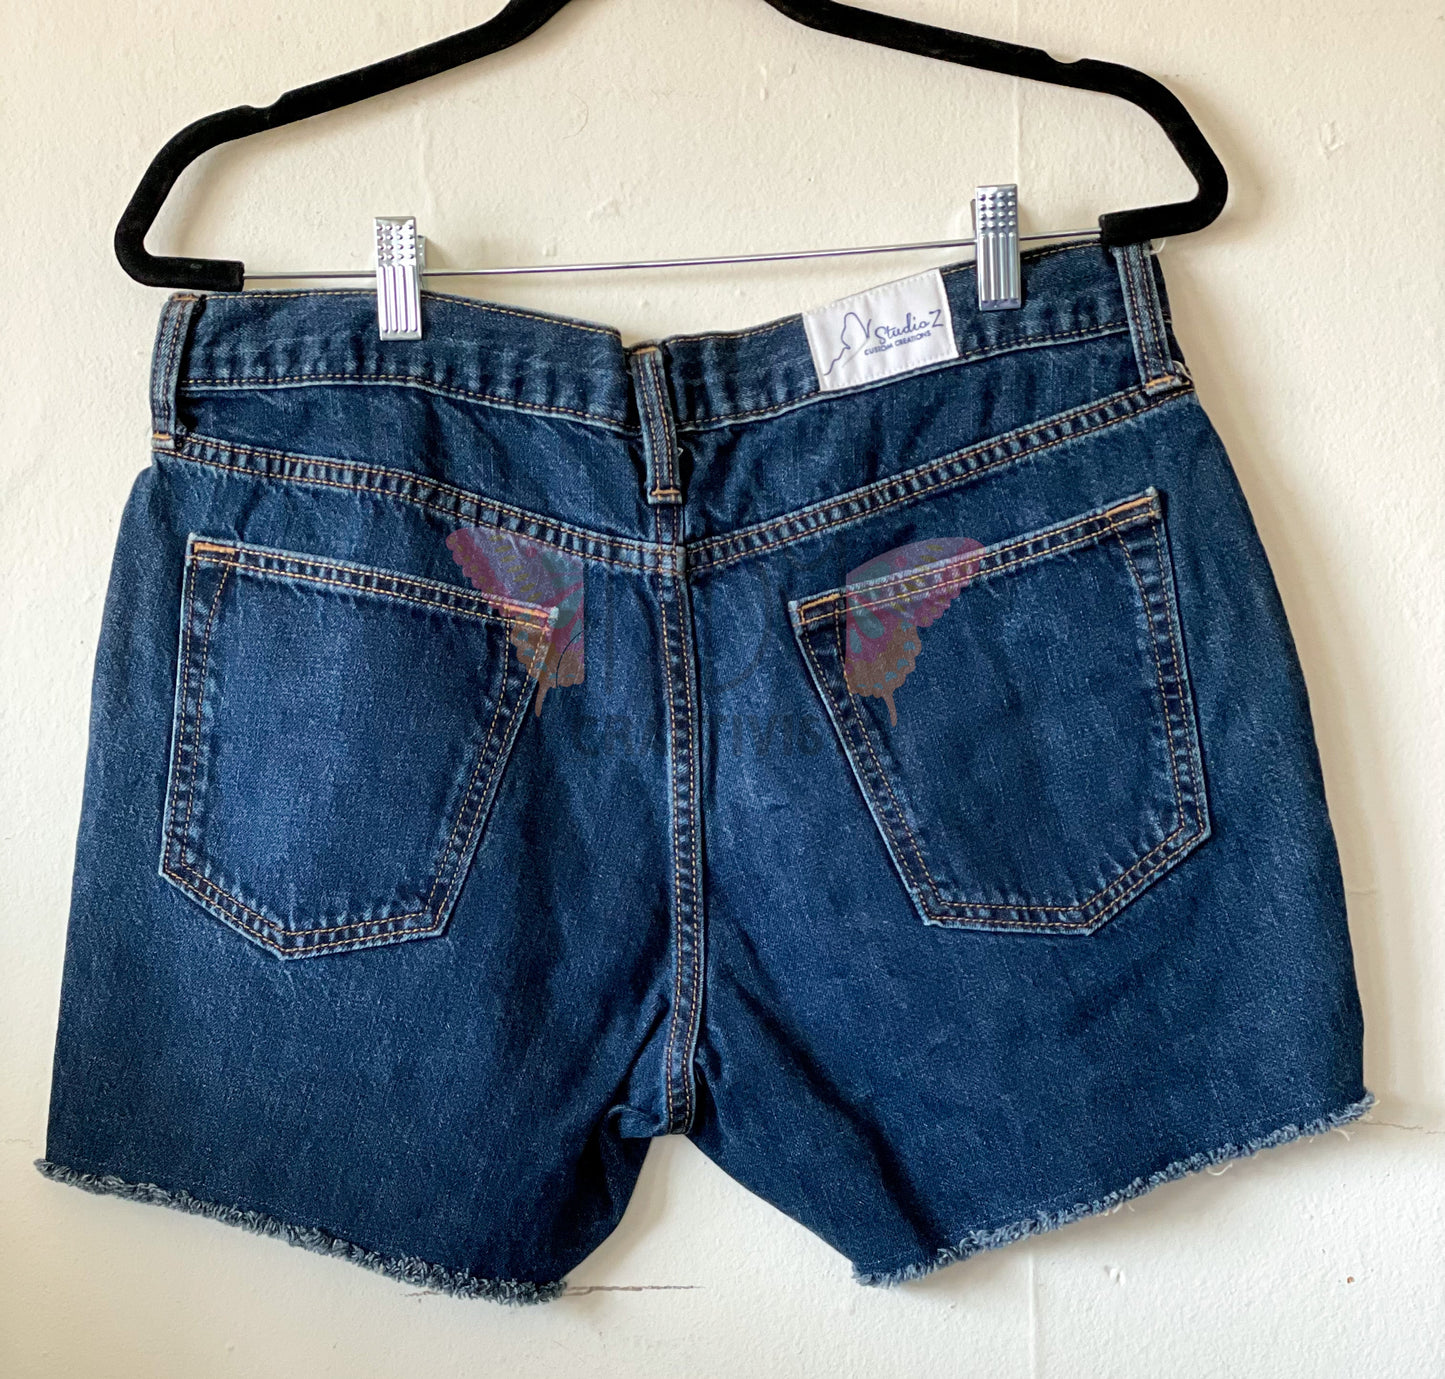 Upcycled Denim Shorts with Colts Flower